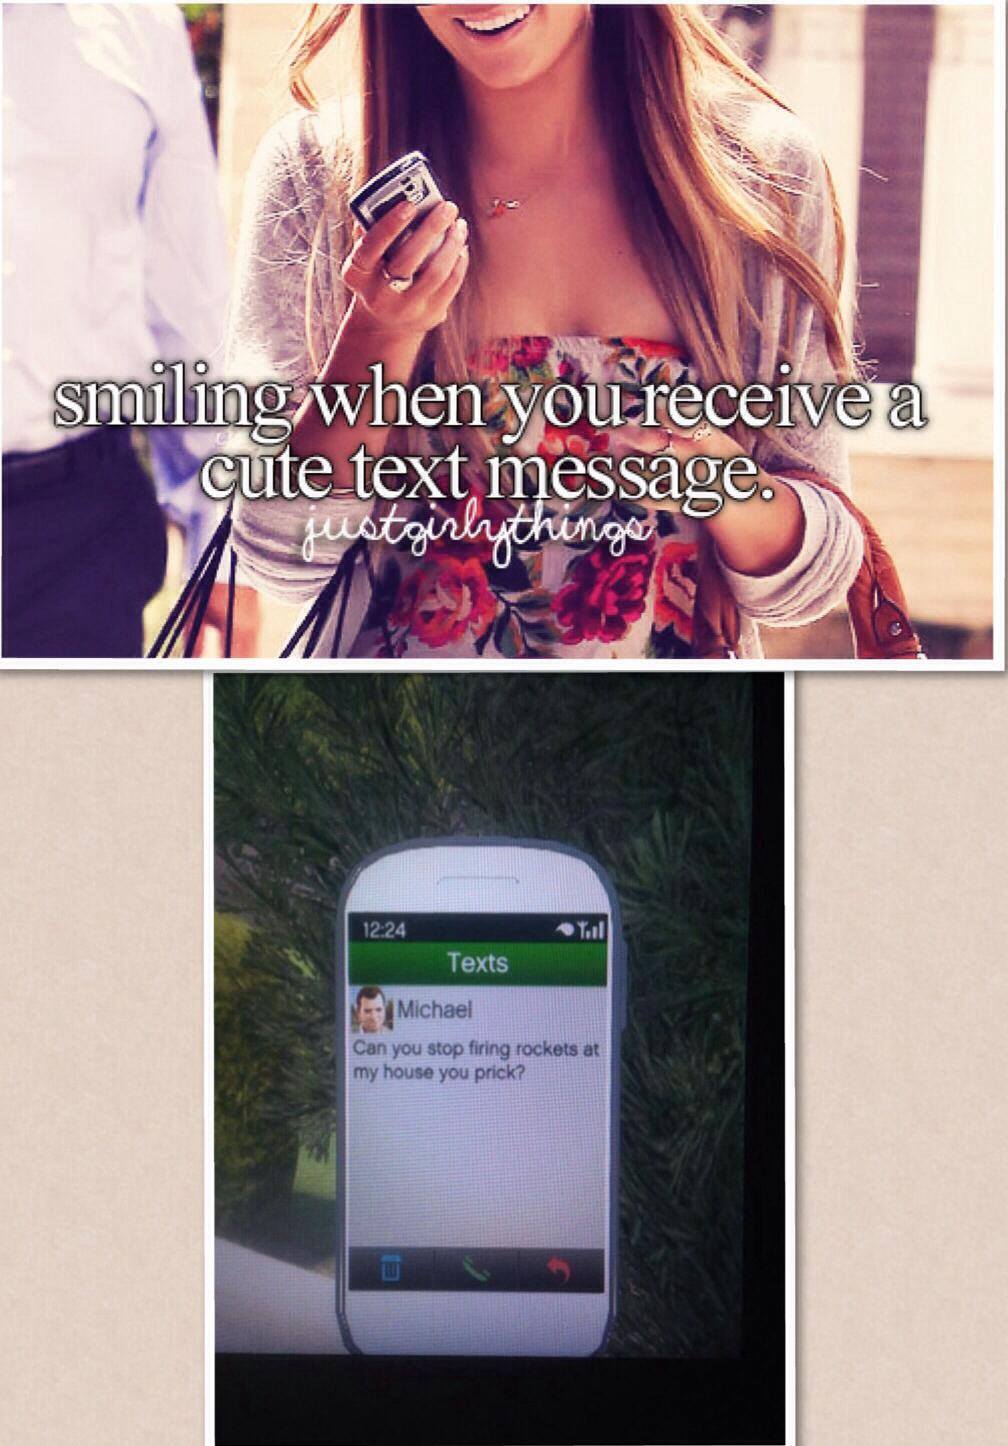 Gaming memes - just girly things - smiling when you receive a cute text message.